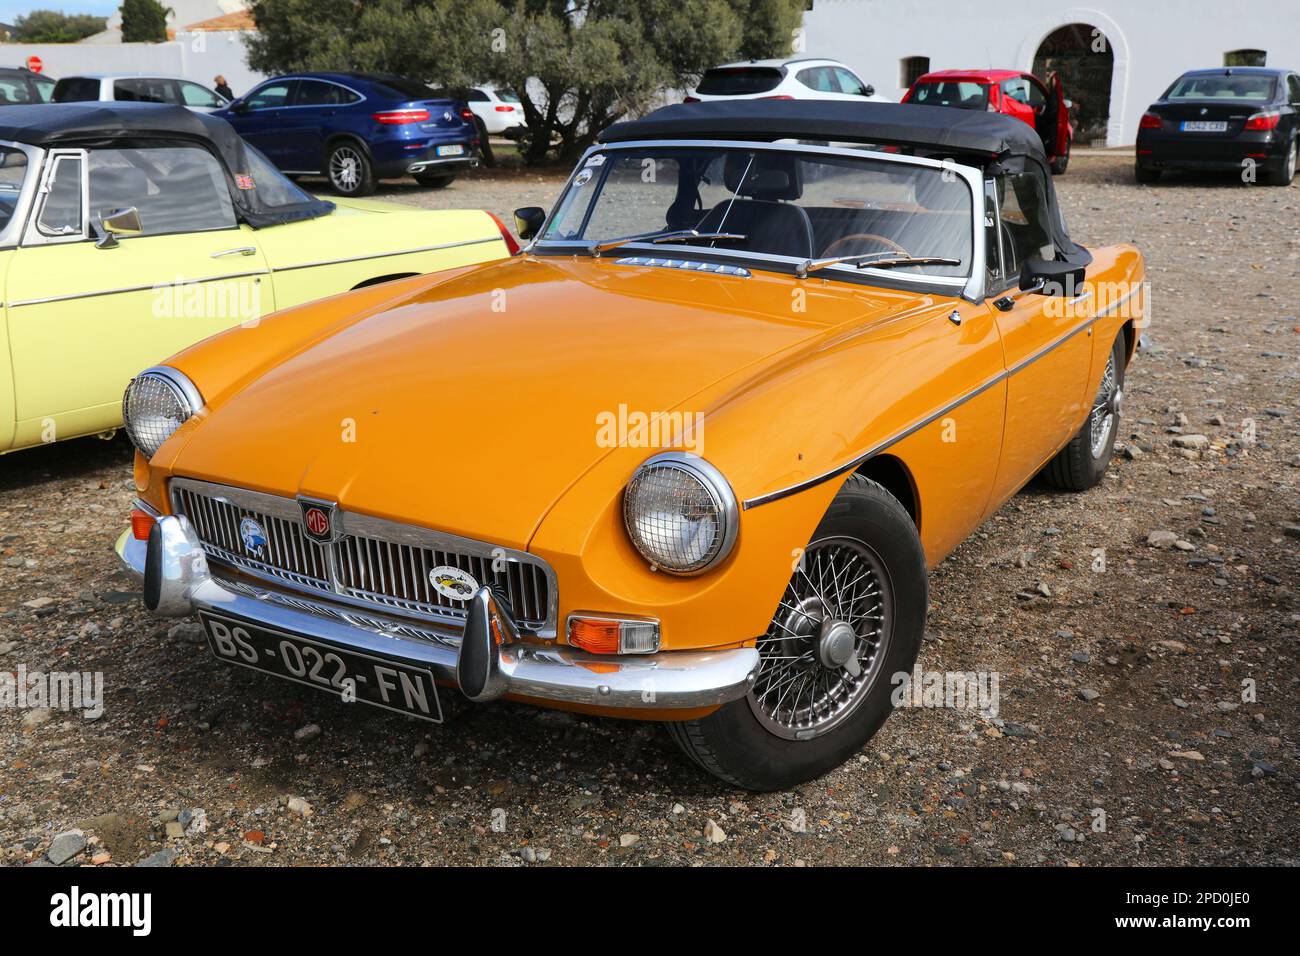 CADAQUES, SPAIN - OCTOBER 5, 2021: MG MGB oldtimer British sports car roadster parked in Cadaques, Spain. Stock Photo